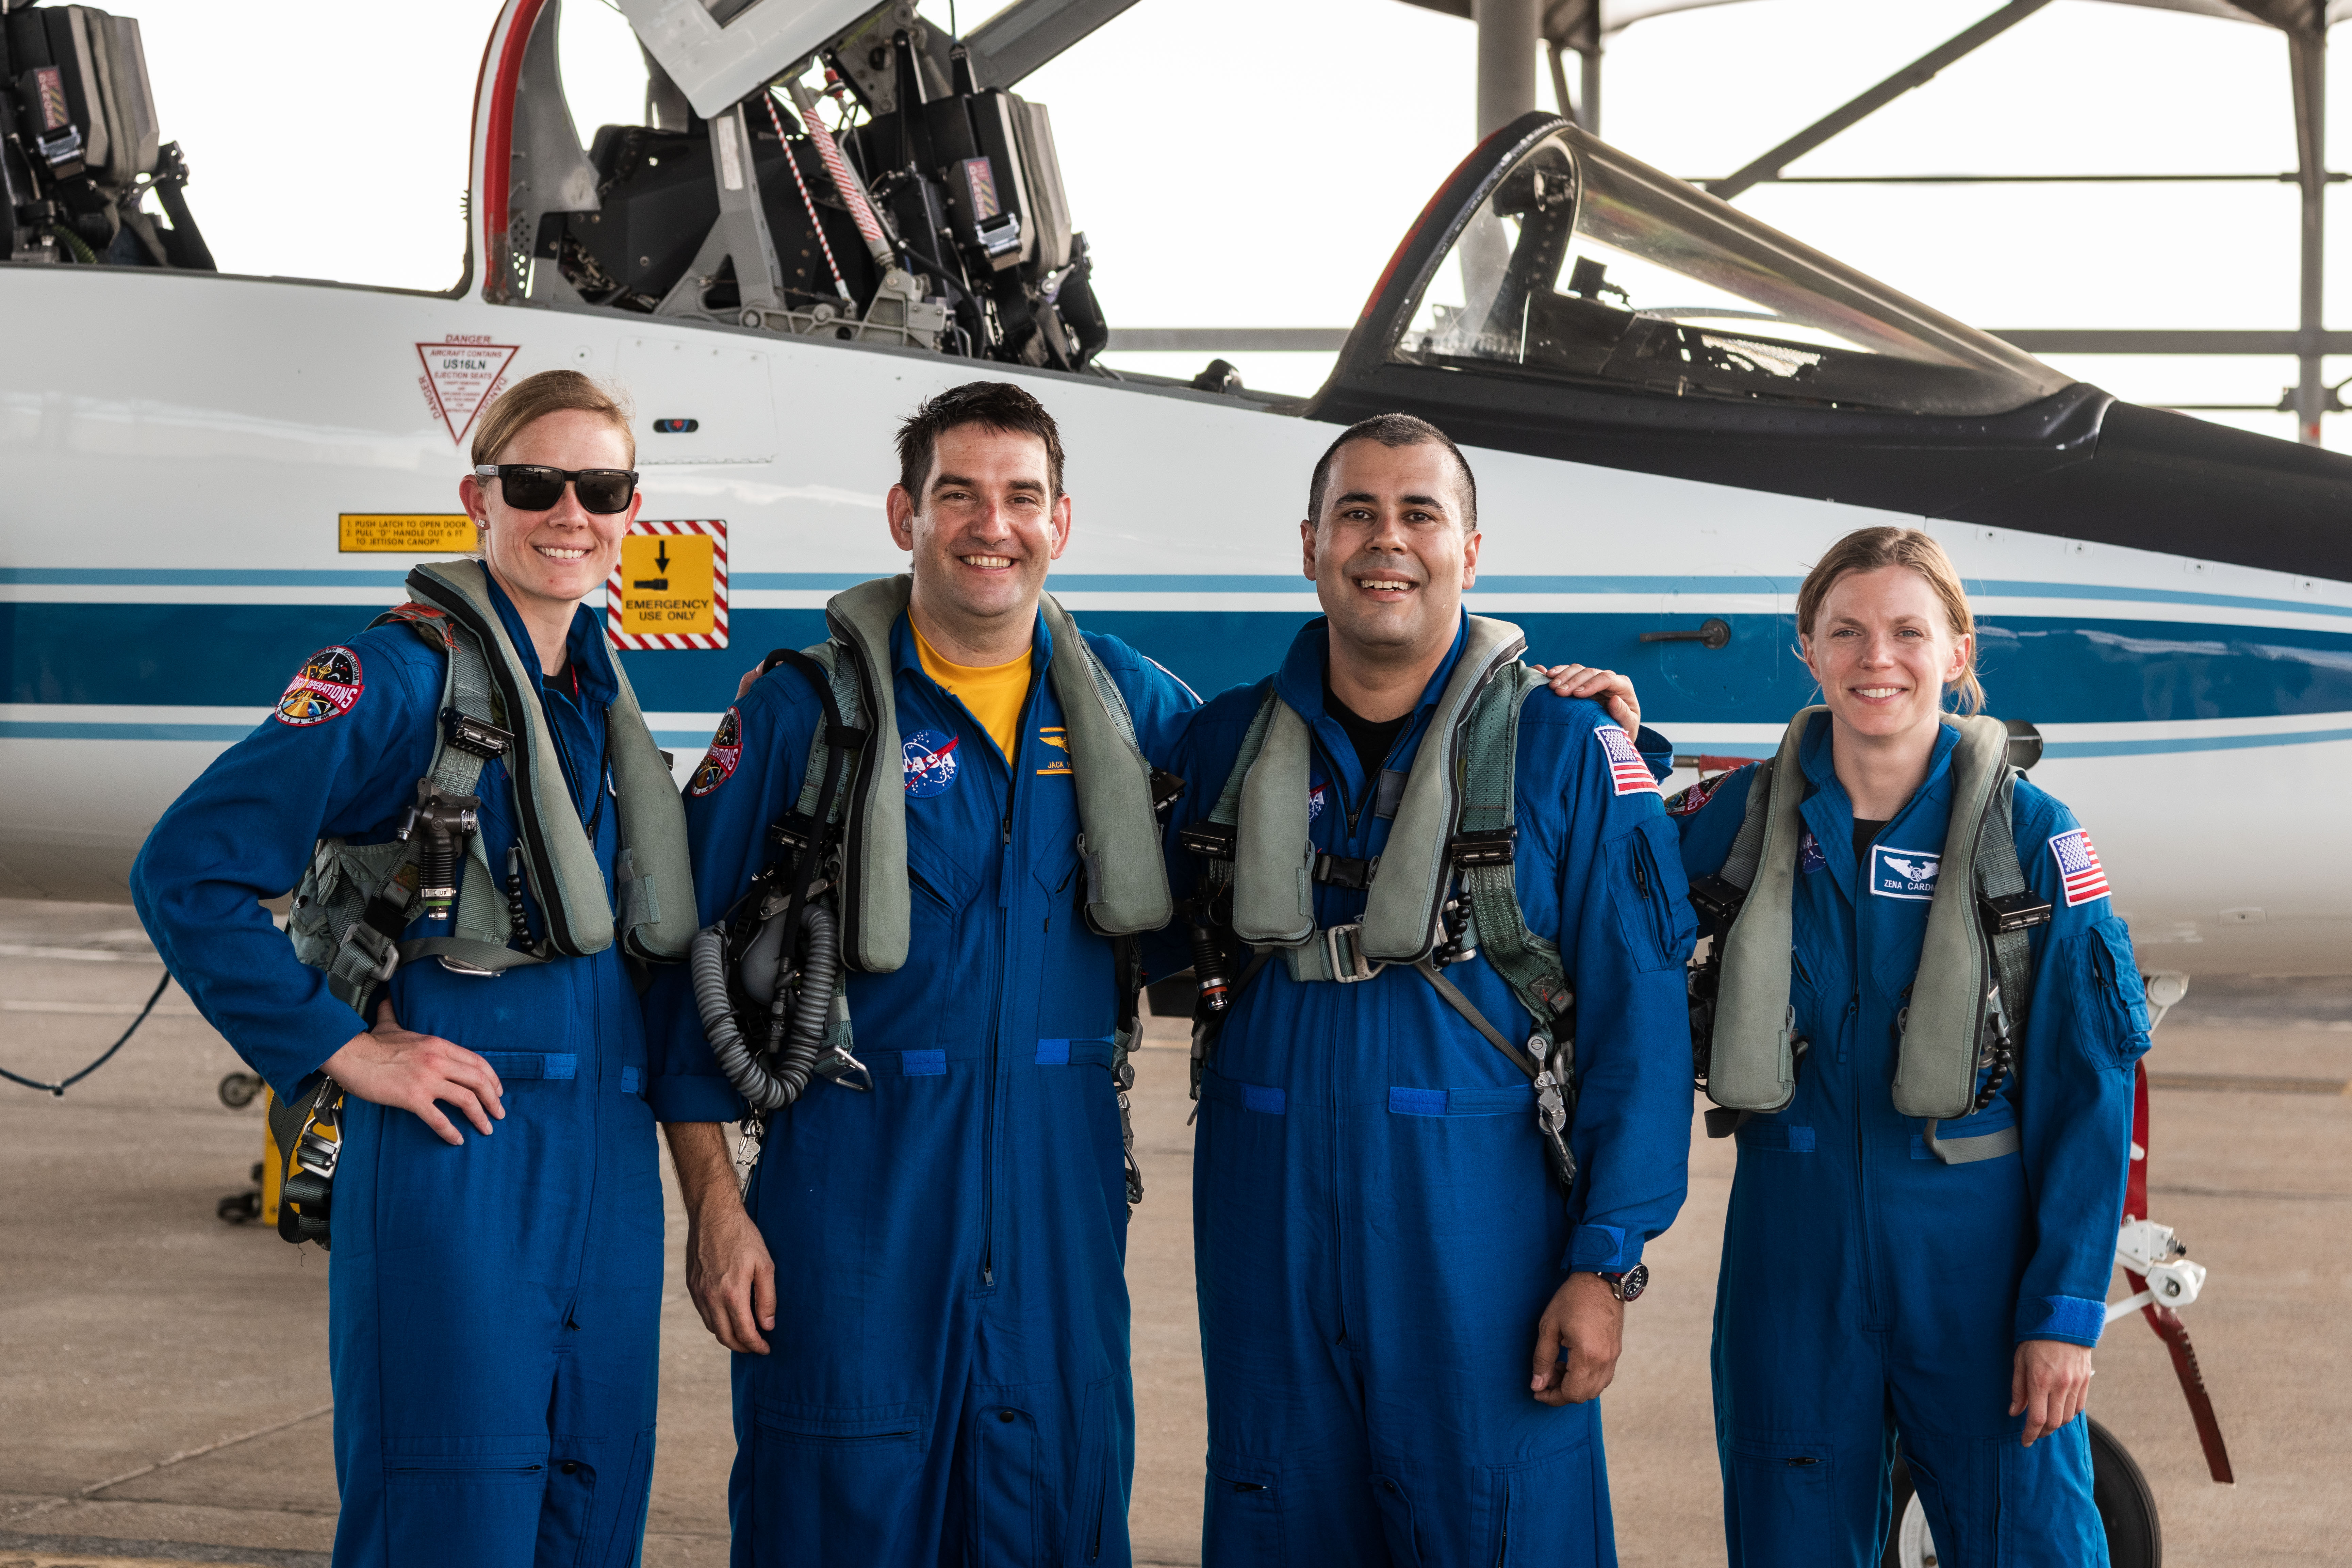 (18 August 2022) Pictured left to right: NASA Astronaut Candidates Nichole “Vapor” Ayers, Jack “Radio” Hathaway, NASA Scientific Photographer Josh Valcarcel, and NASA Astronaut Zena Cardman pose in front of a T-38 aircraft at Ellington Field in Houston, Texas.